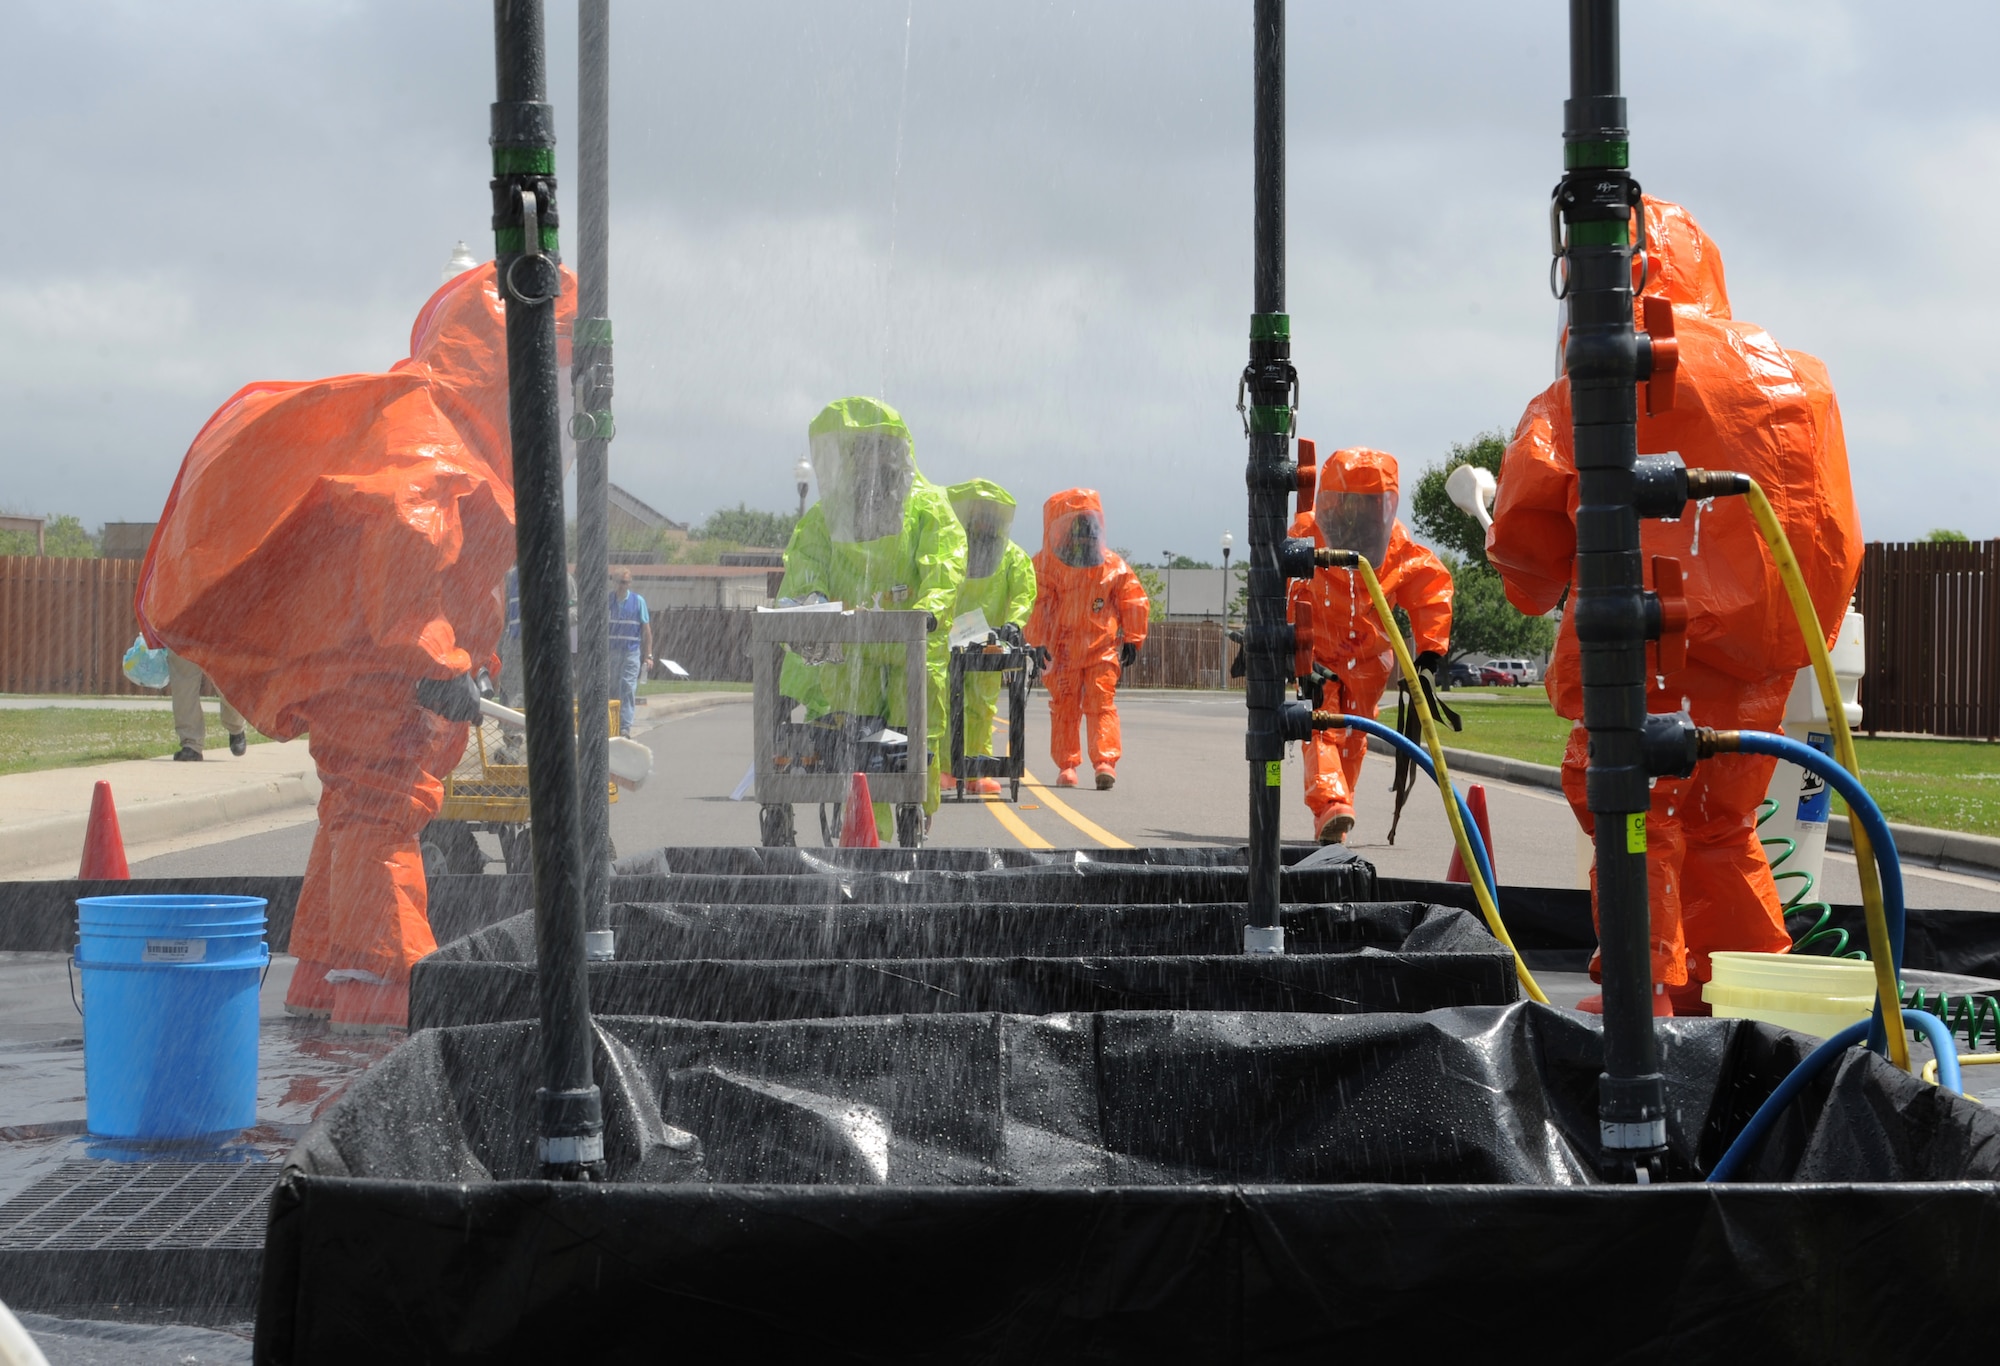 81st Aerospace Medicine Squadron bioenvironmental engineering technicians and 81st Infrastructure Division firefighters approach the decontamination site during a Chemical, Biological, Radiological, Nuclear and Explosive exercise scenario, April 21, 2016, Keesler Air Force Base, Miss. The Force Protection Condition exercise scenario simulated an intruder entering the hazardous waste 90-day accumulation site, where an explosion occurred causing a mass casualty event. The exercise tested the base’s capability to react to and recover from a mass casualty event. (U.S. Air Force photo by Kemberly Groue)